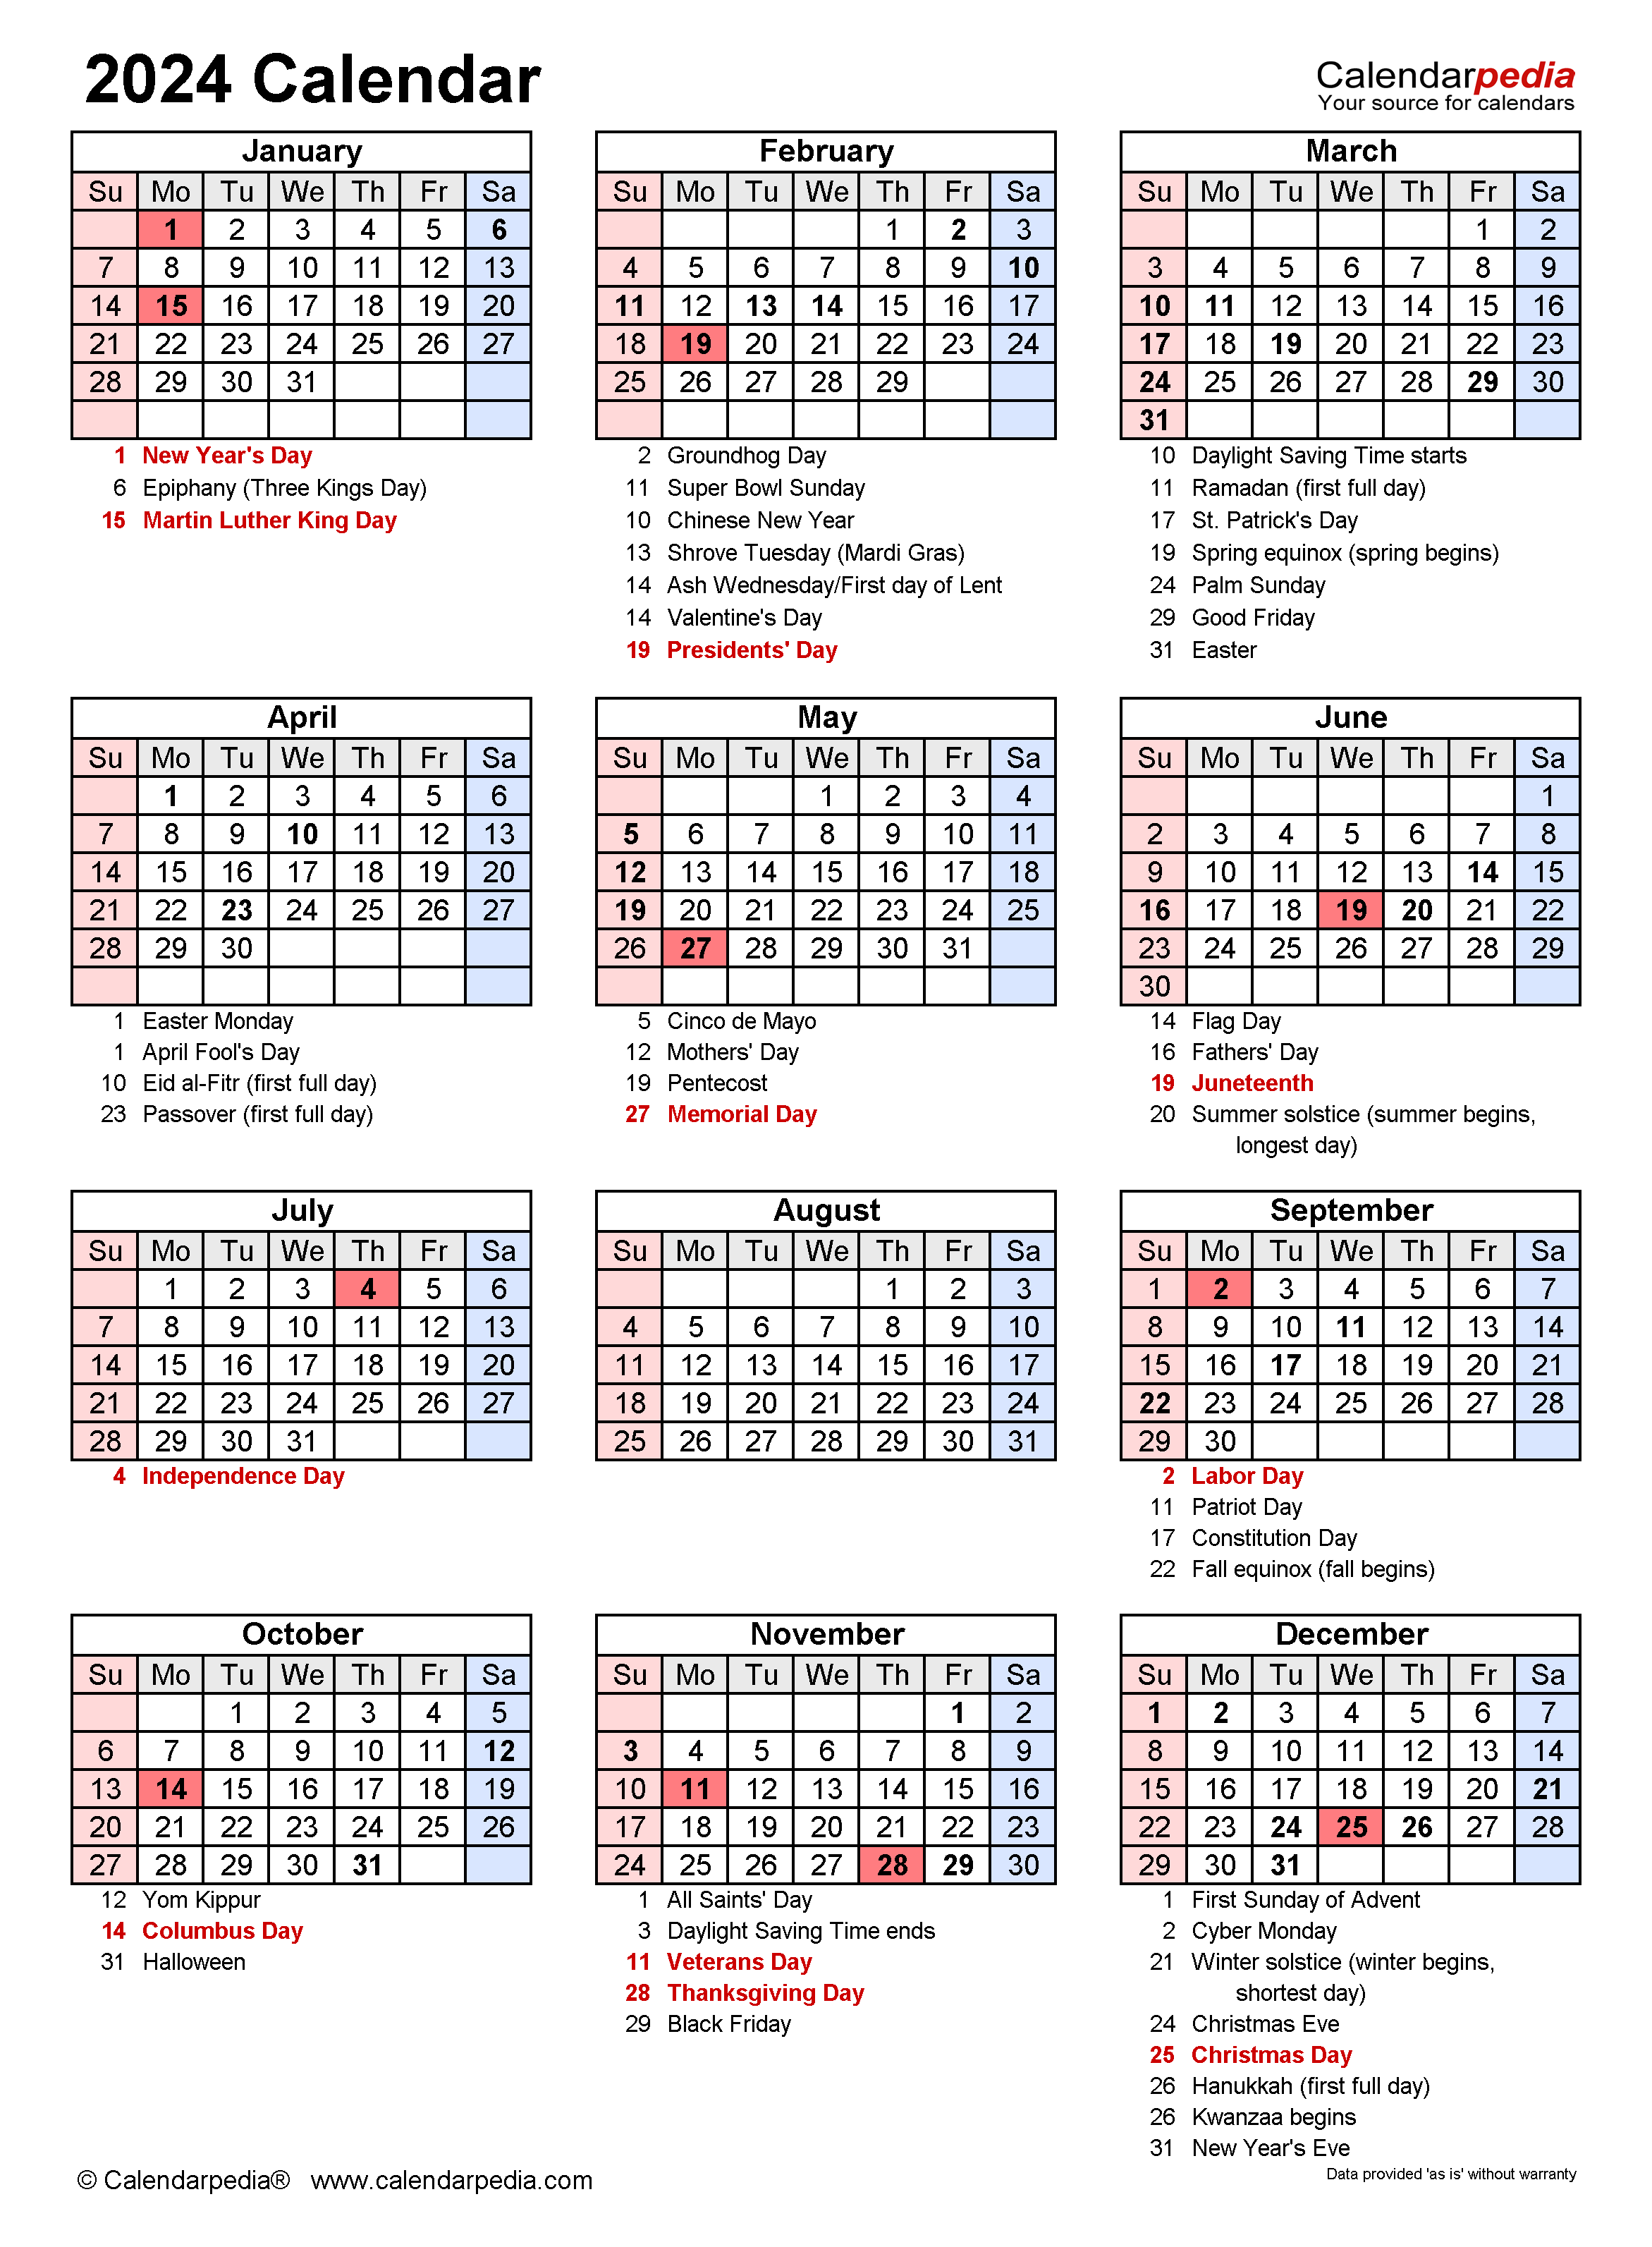 2024 Calendar Free Printable PDF Templates Calendarpedia - Free Printable 2024 Yearly Calendar With Holidays Time And Date